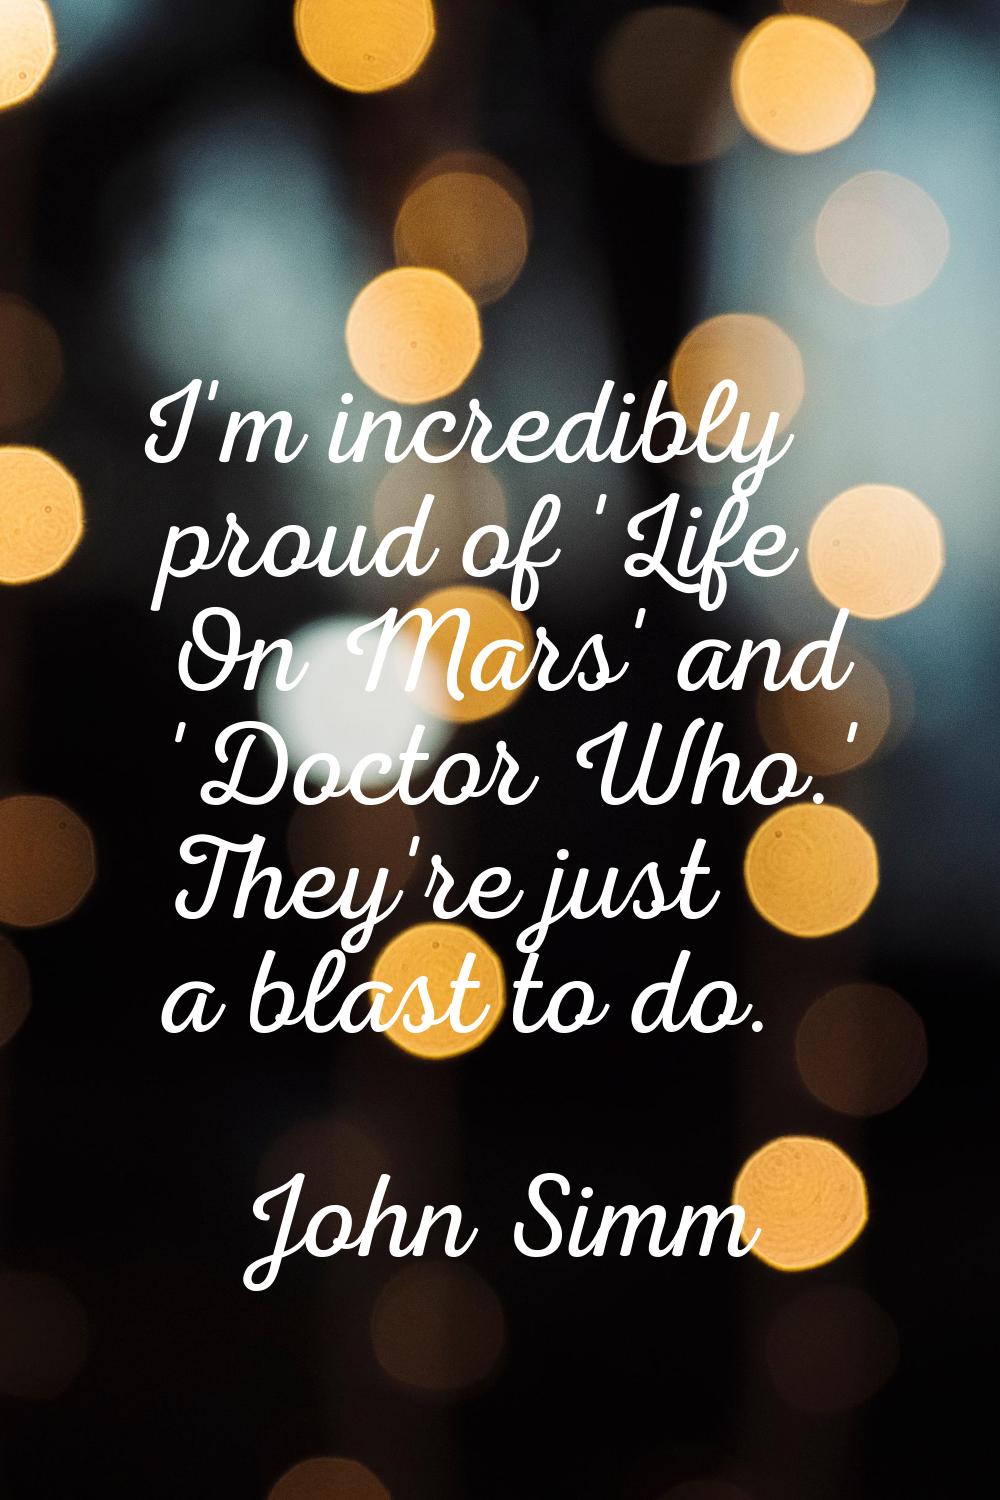 I'm incredibly proud of 'Life On Mars' and 'Doctor Who.' They're just a blast to do.